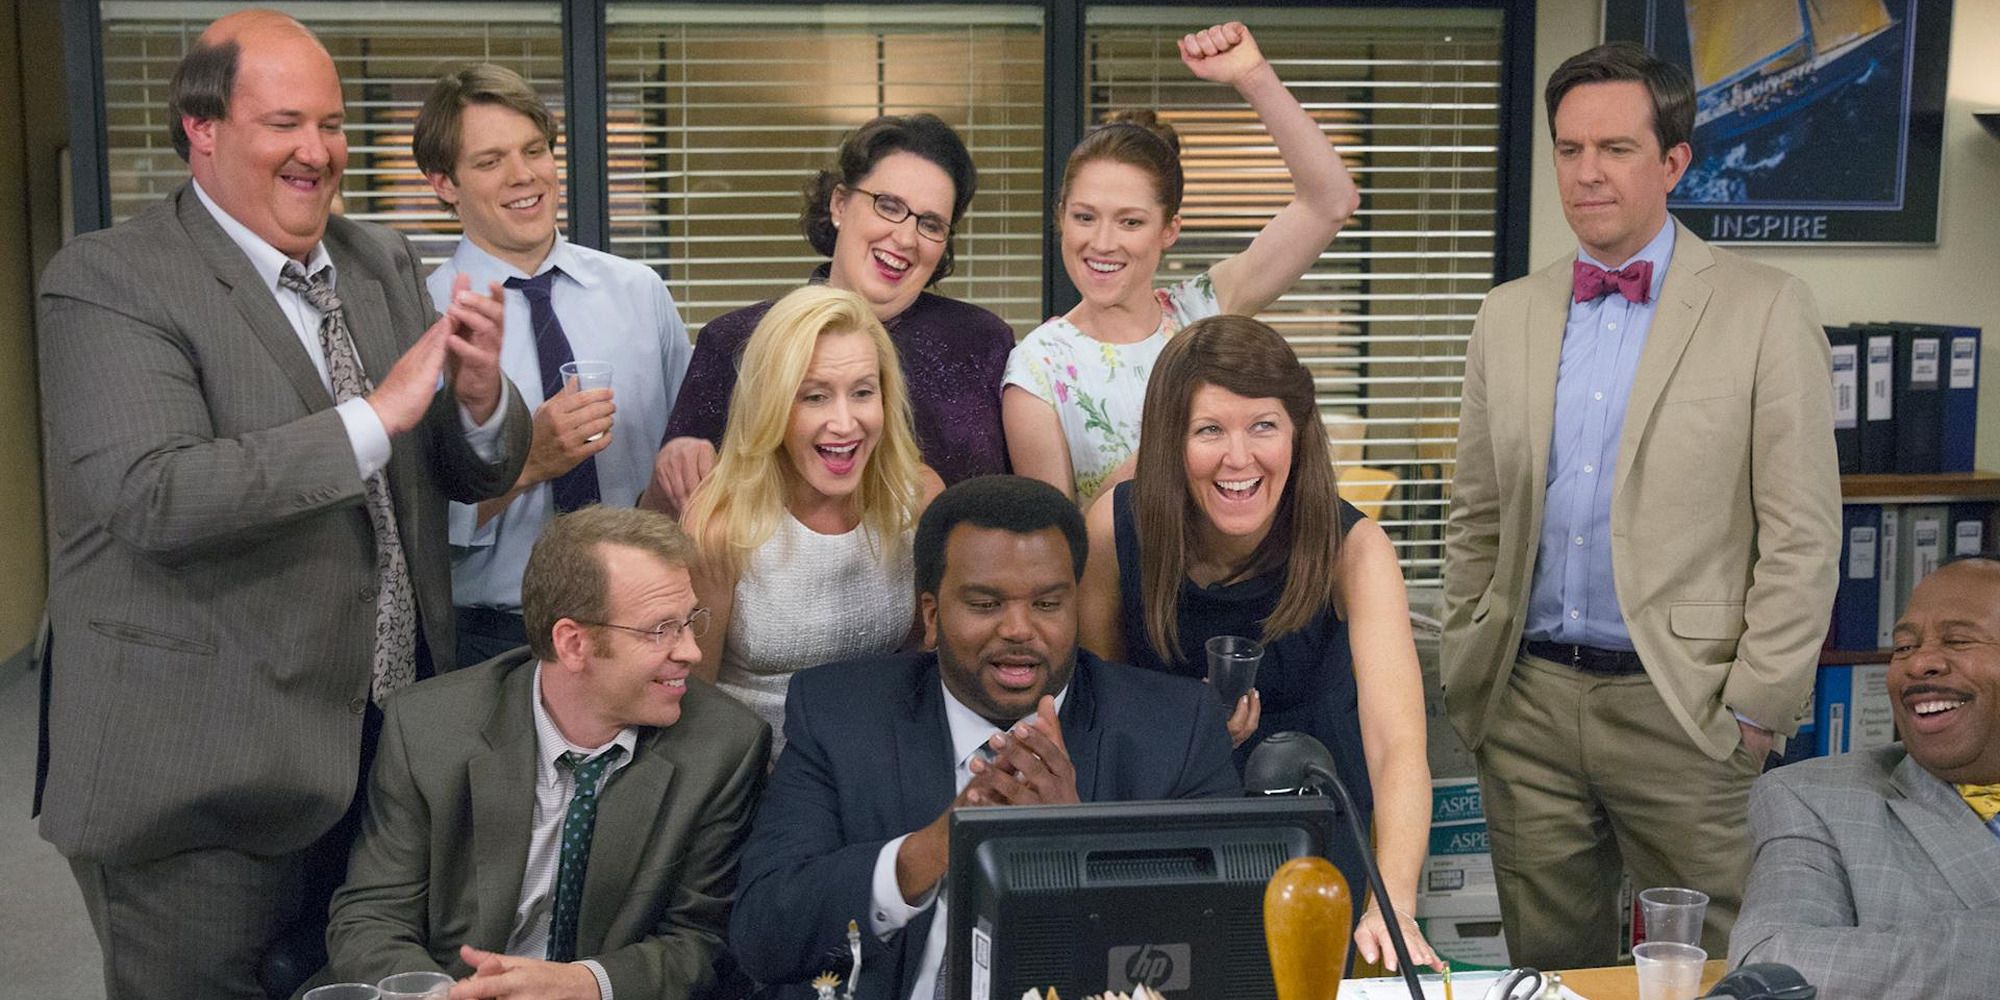 The cast of 'The Office' in front of a computer, cheering